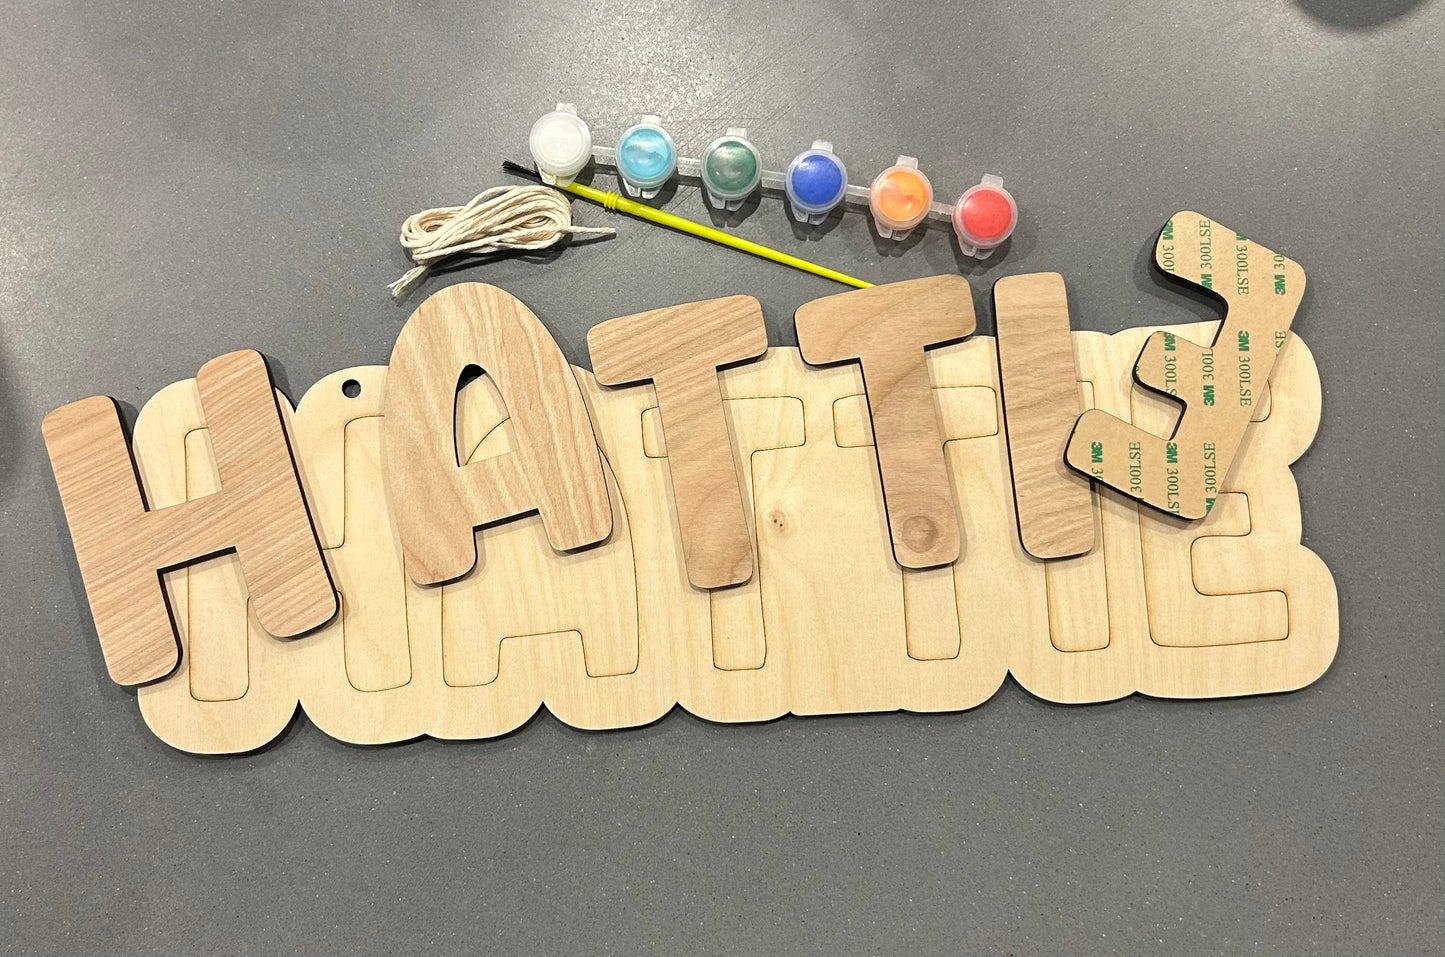 Personalized Name Craft Kit - 3M Backed